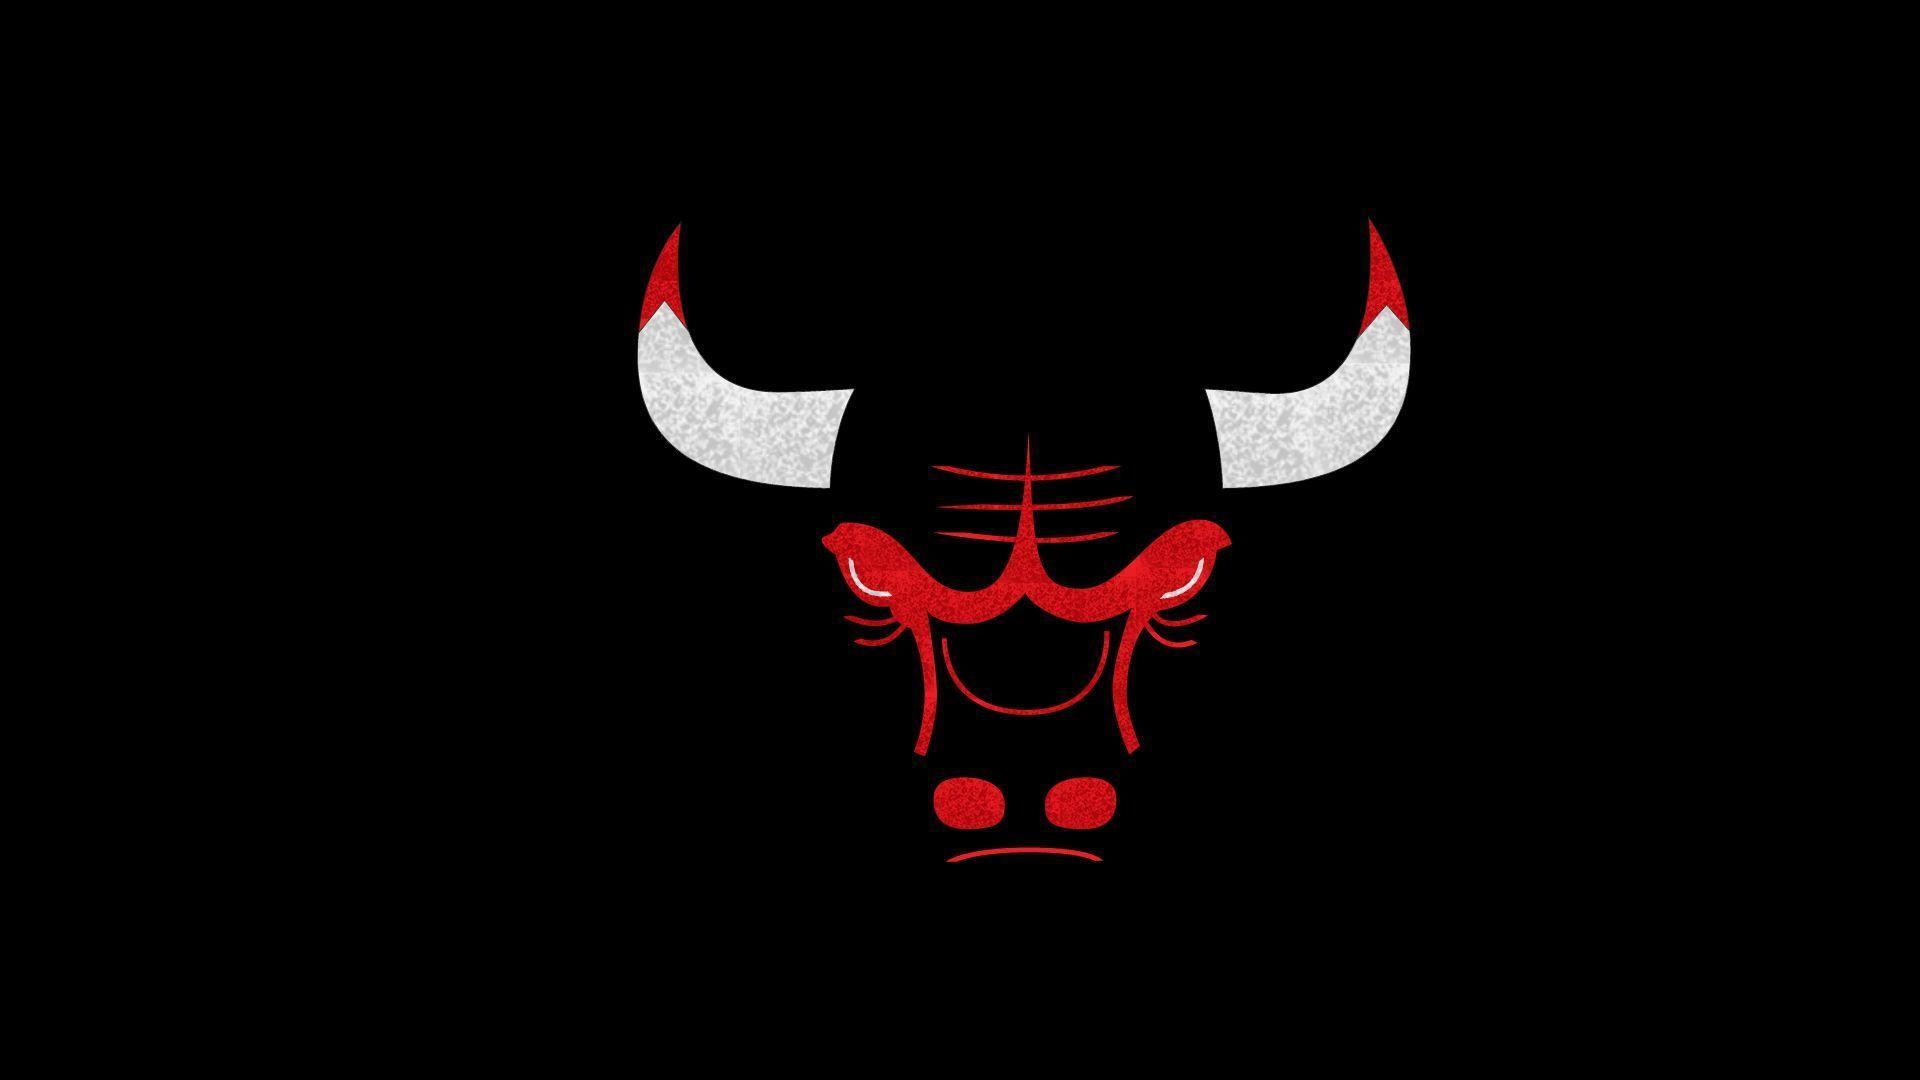 Chicago Bulls Background for PC & Mac, Tablet, Laptop, Mobile